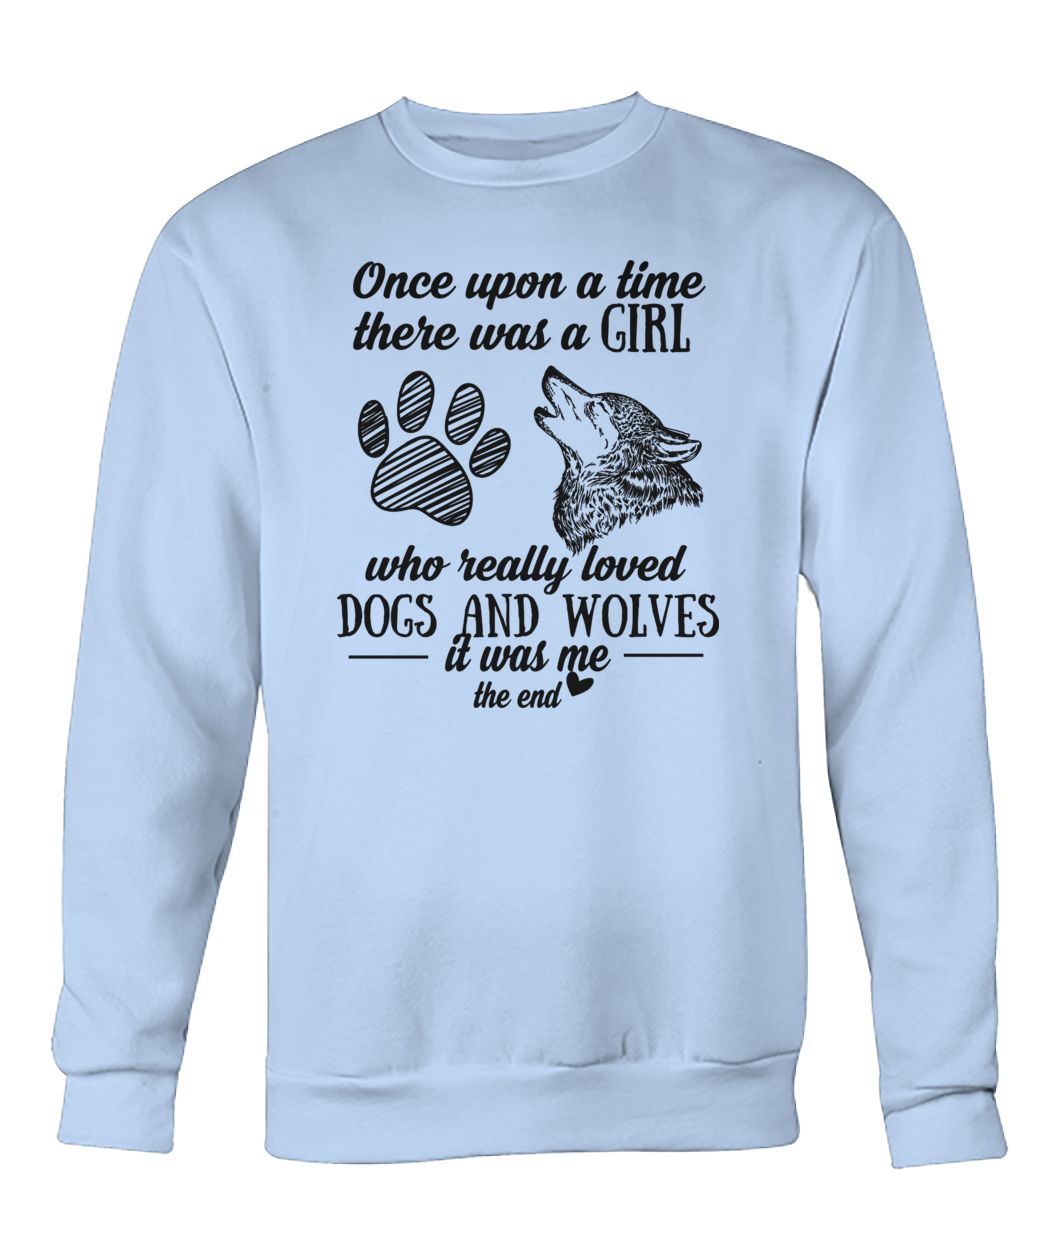 Once upon a time there was a girl who really loved dogs and wolves crew neck sweatshirt